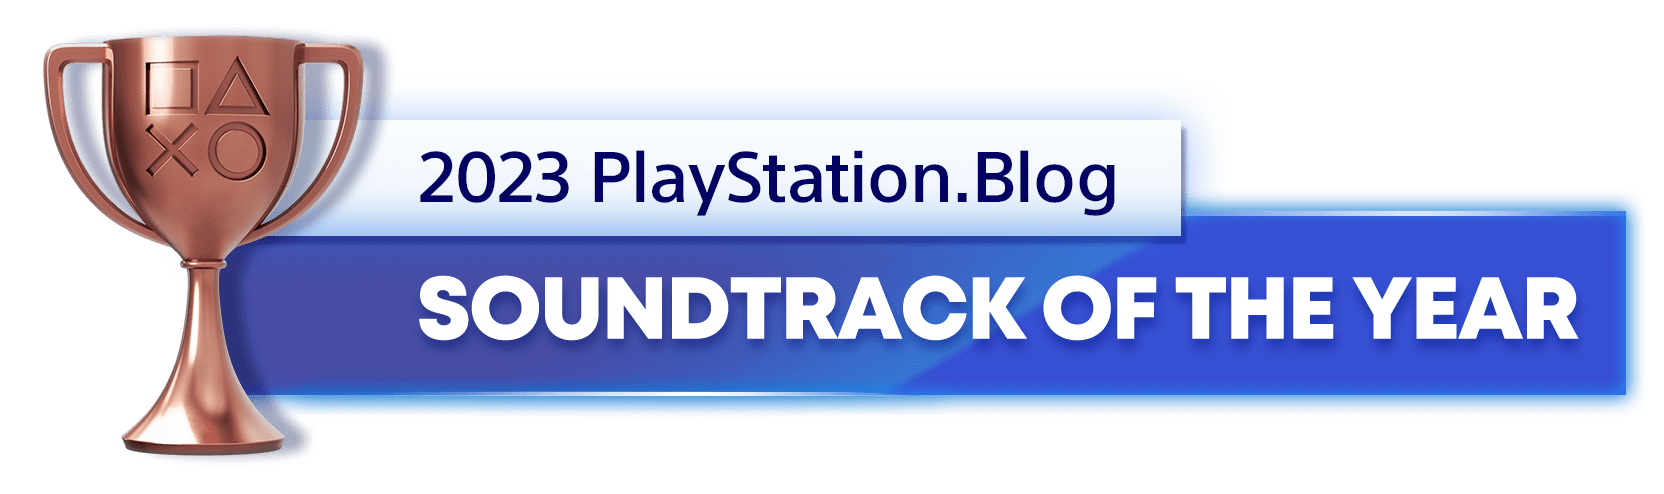 Bronze Trophy for the 2023 PlayStation Blog Soundtrack of the Year Winner